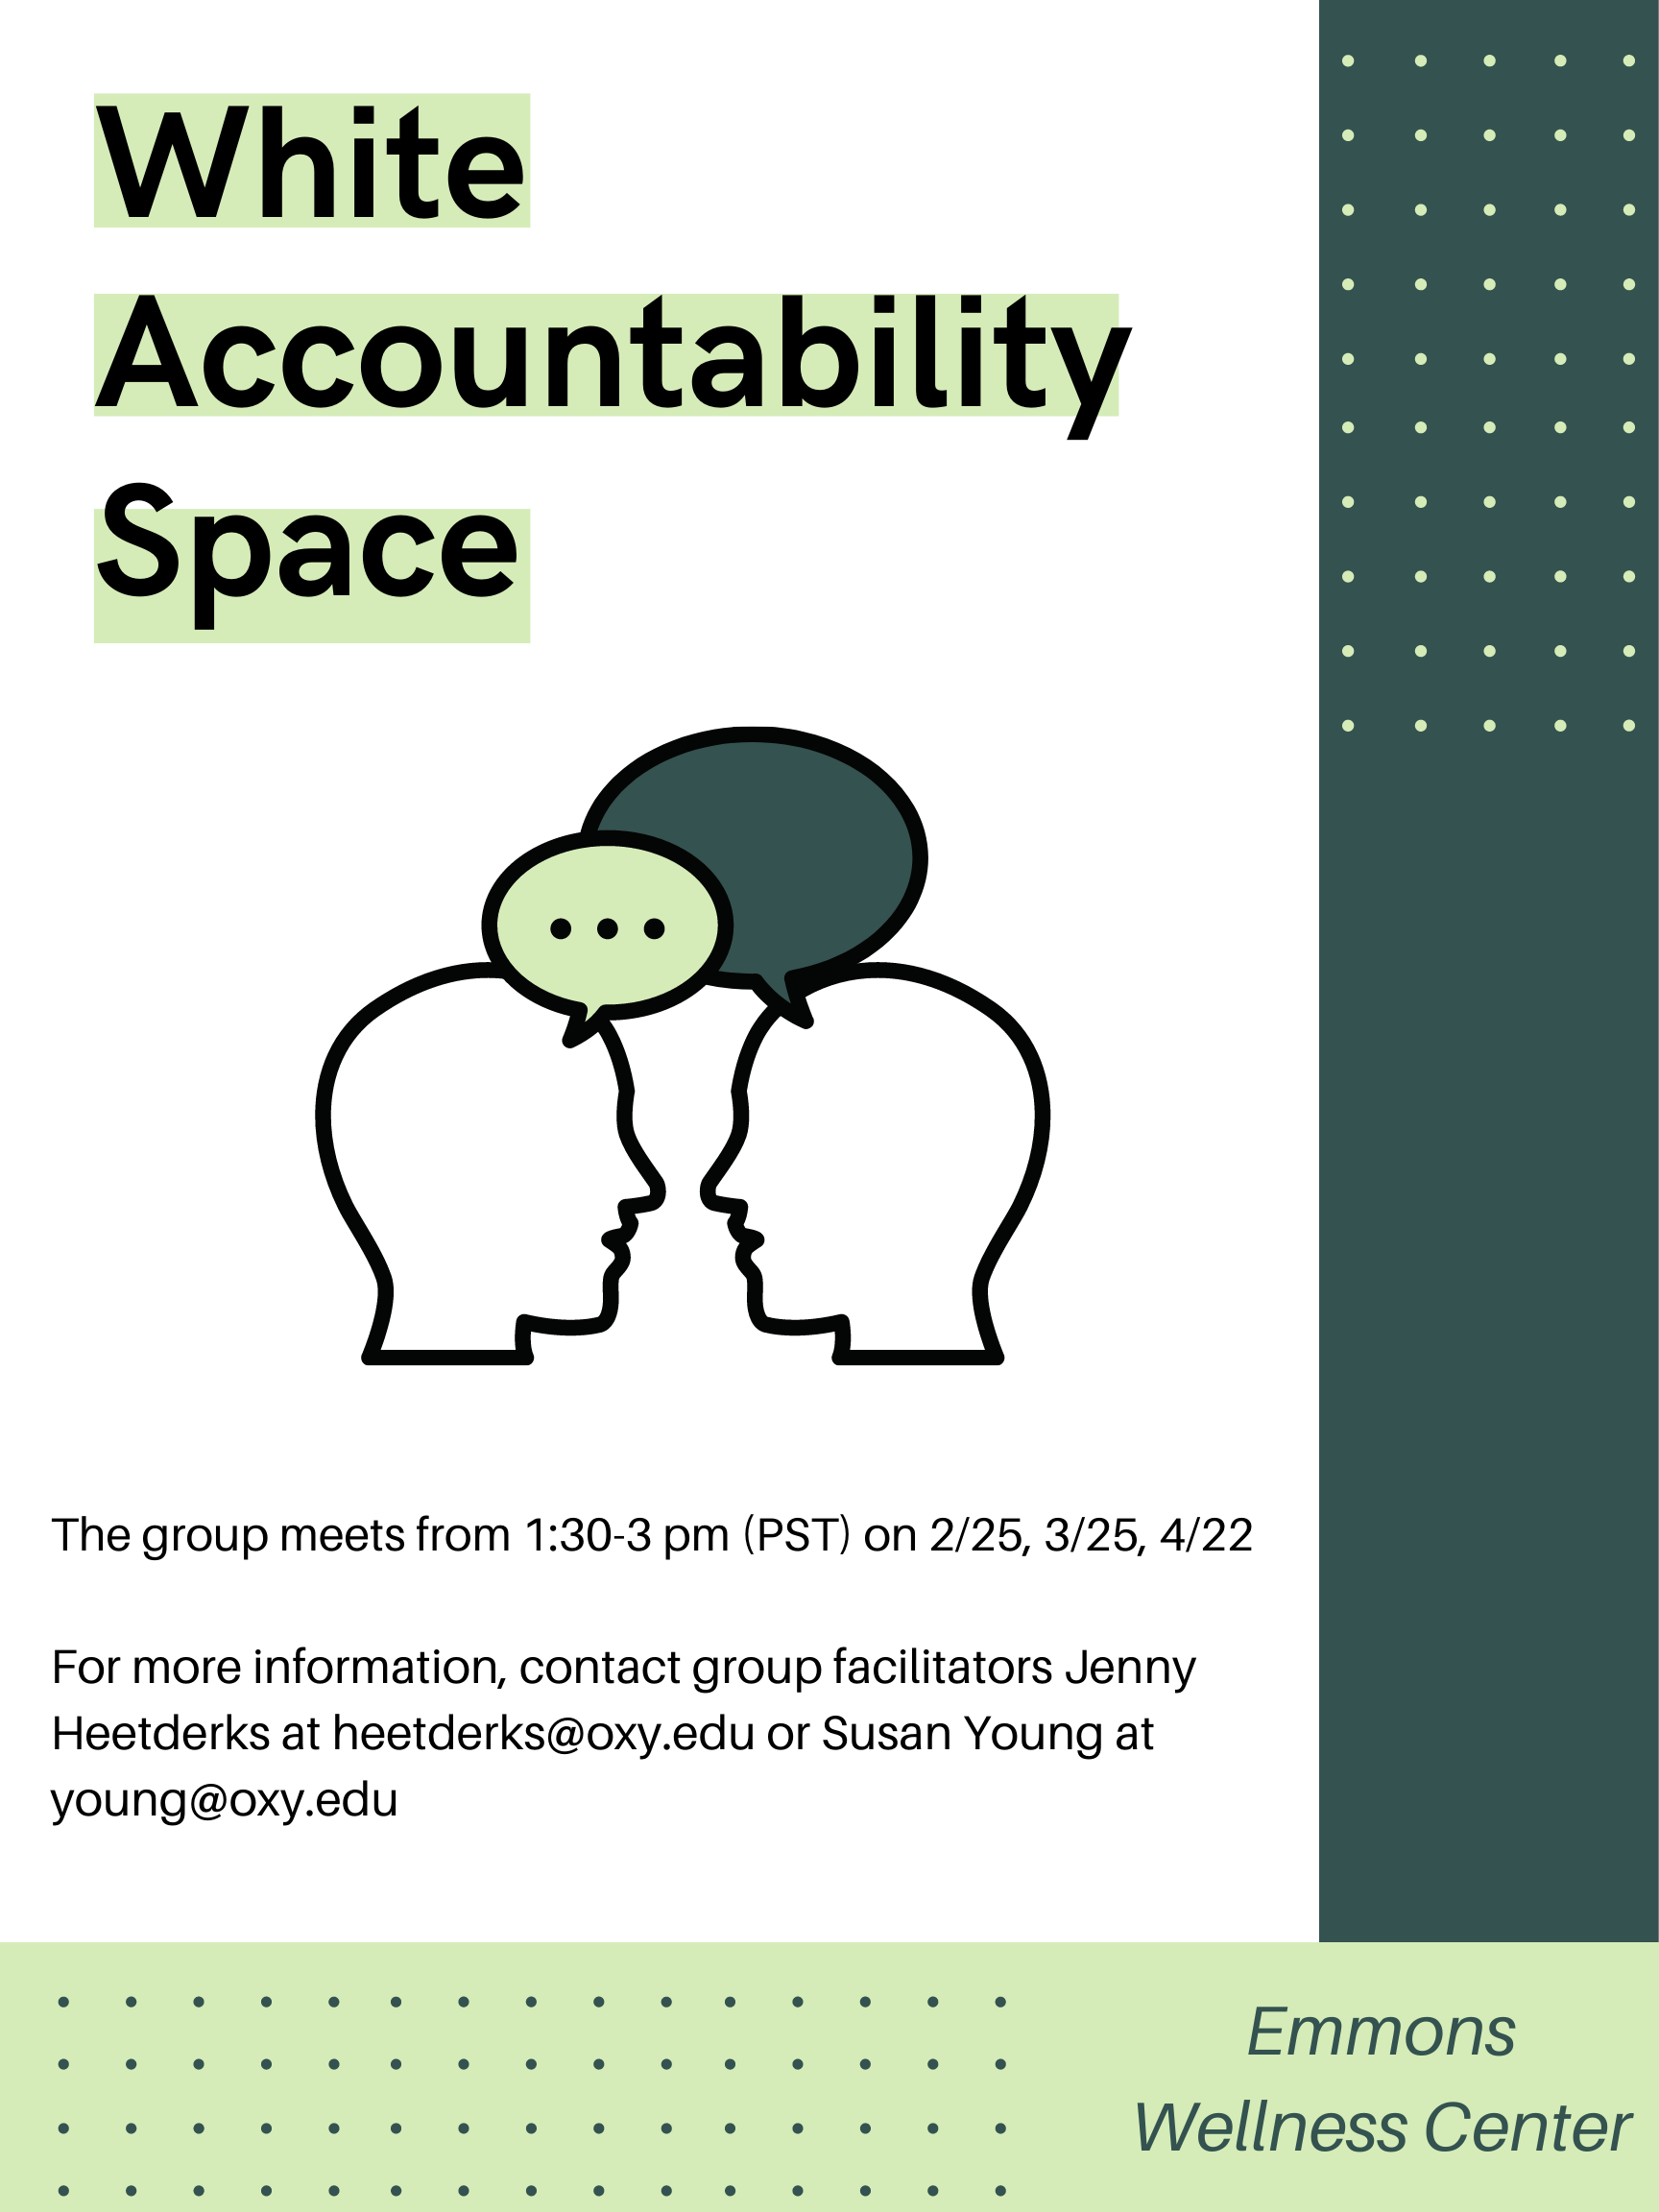 white accountability space flyer describing meeting times, dates, and contact info